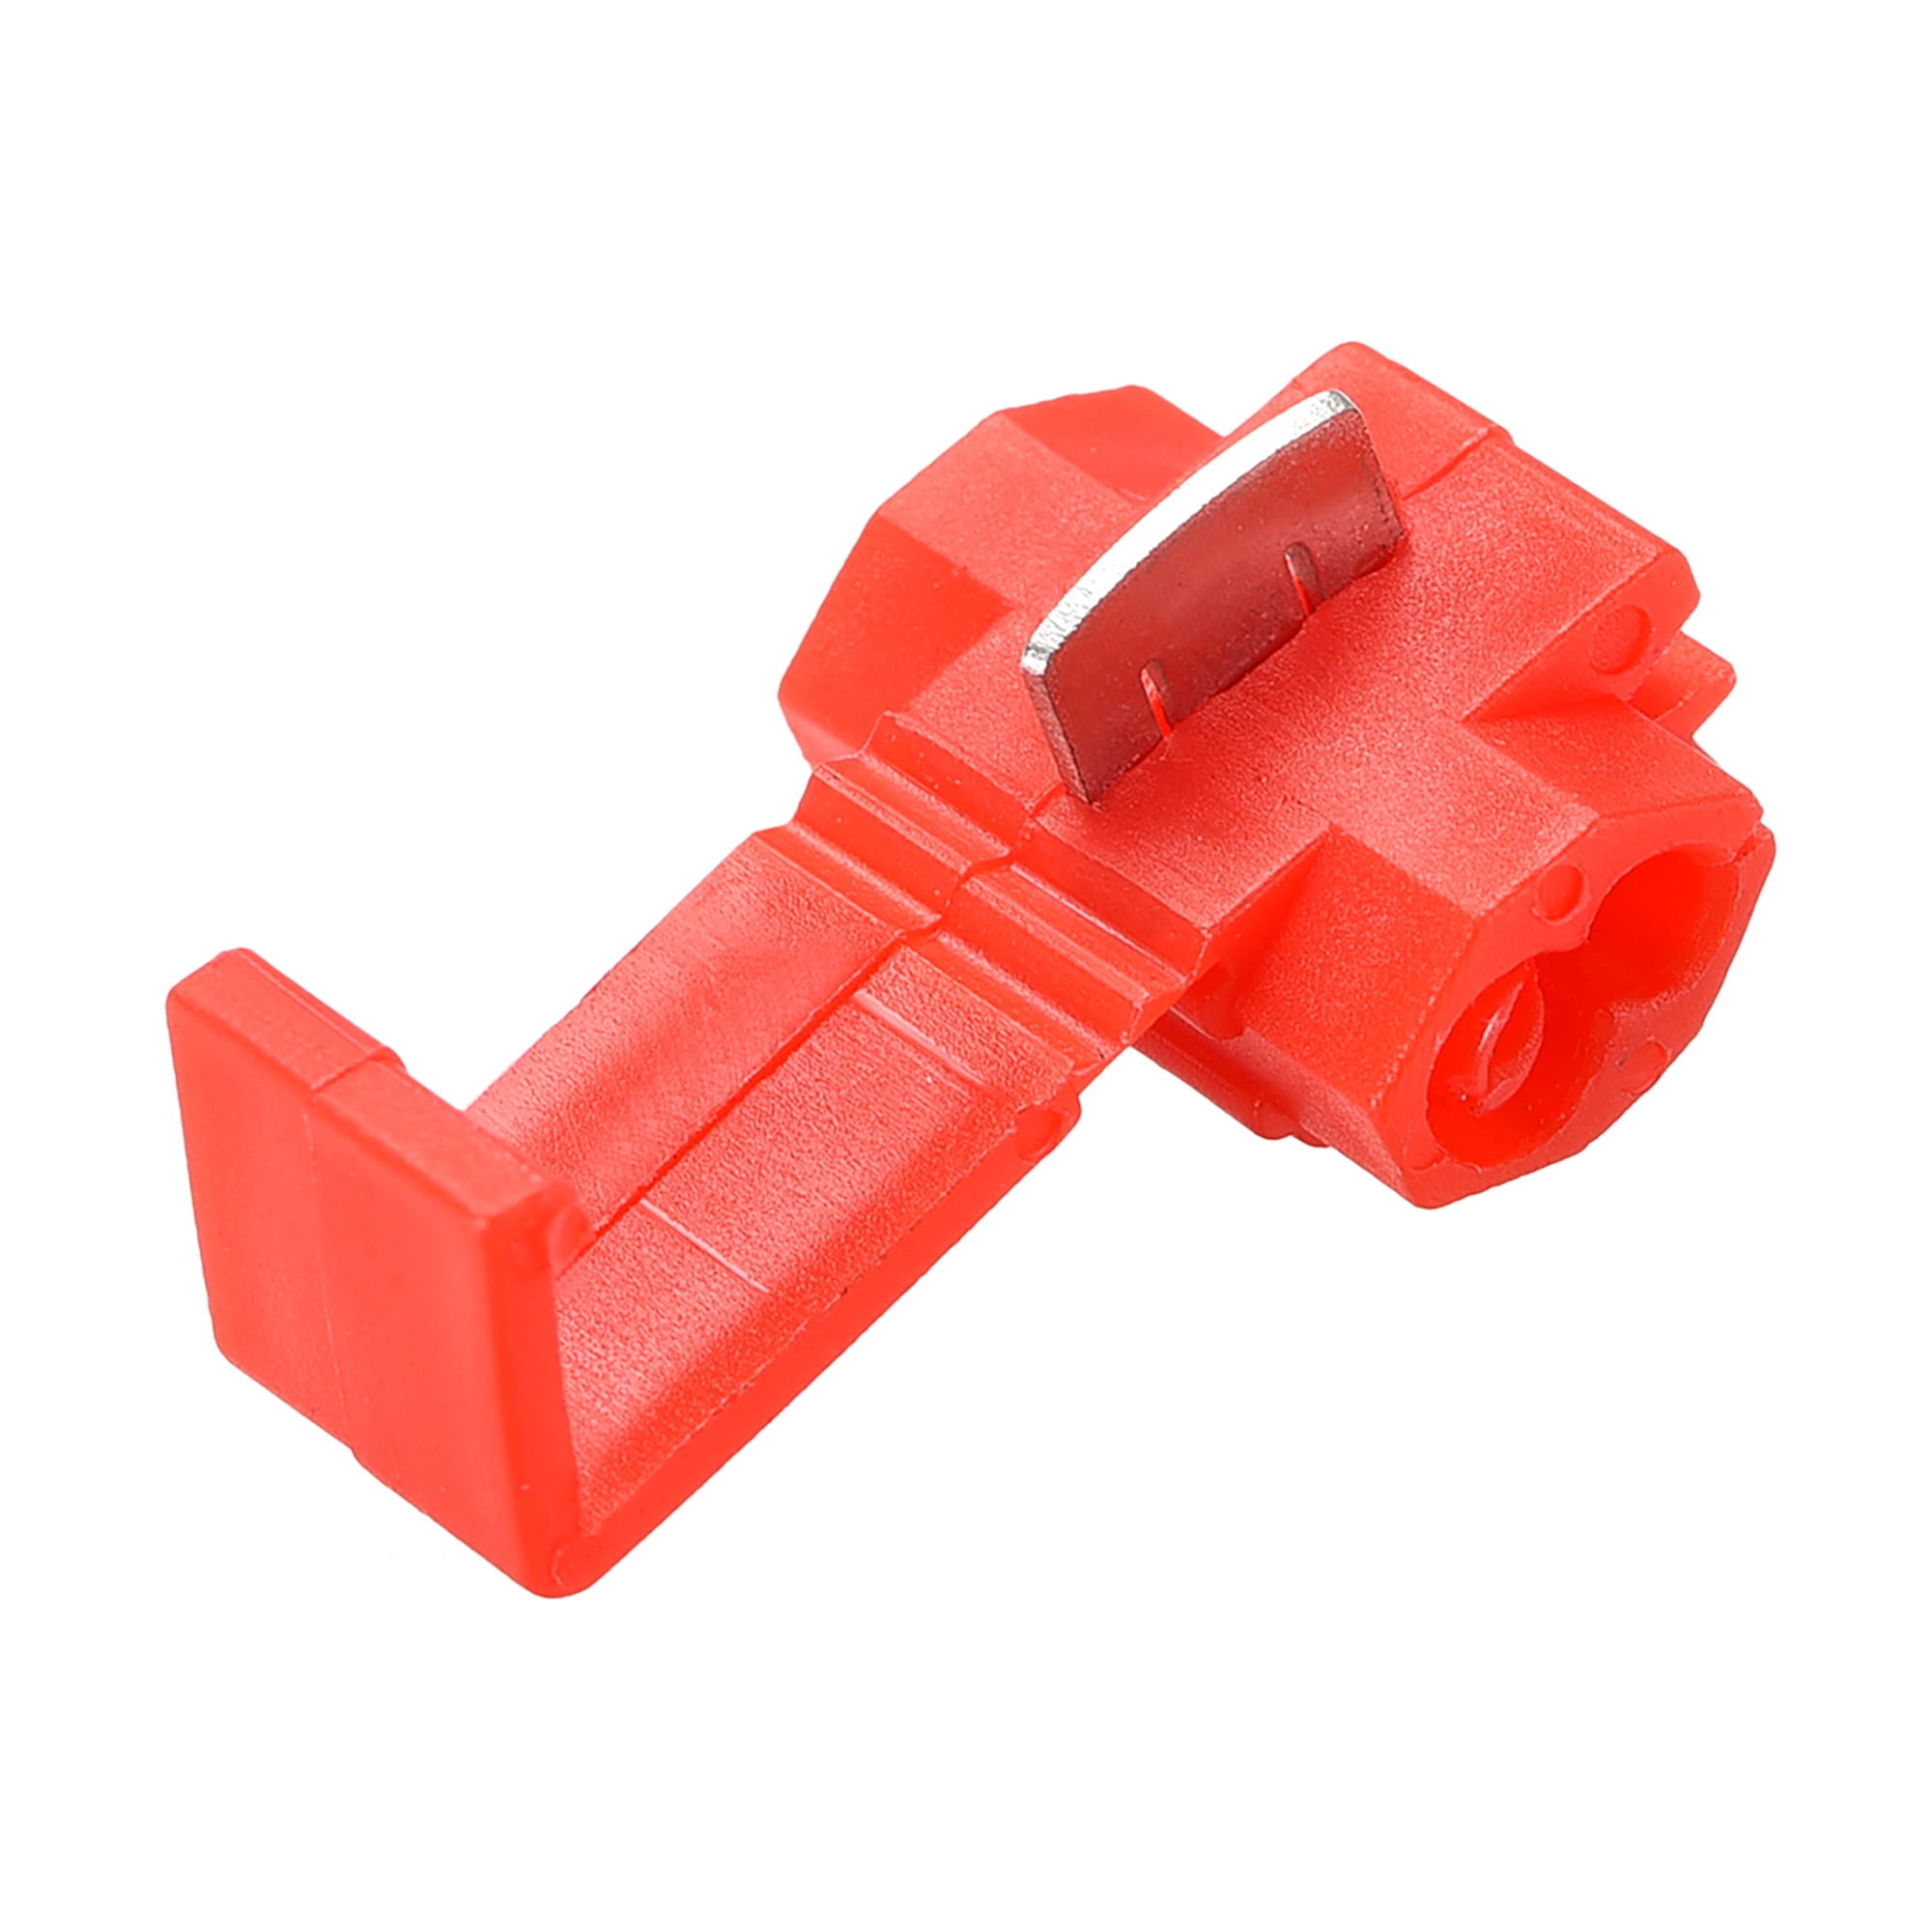 50x Red Snap-Lock ScotchLok Cable Splice and Feed Connectors for Electrical Wire